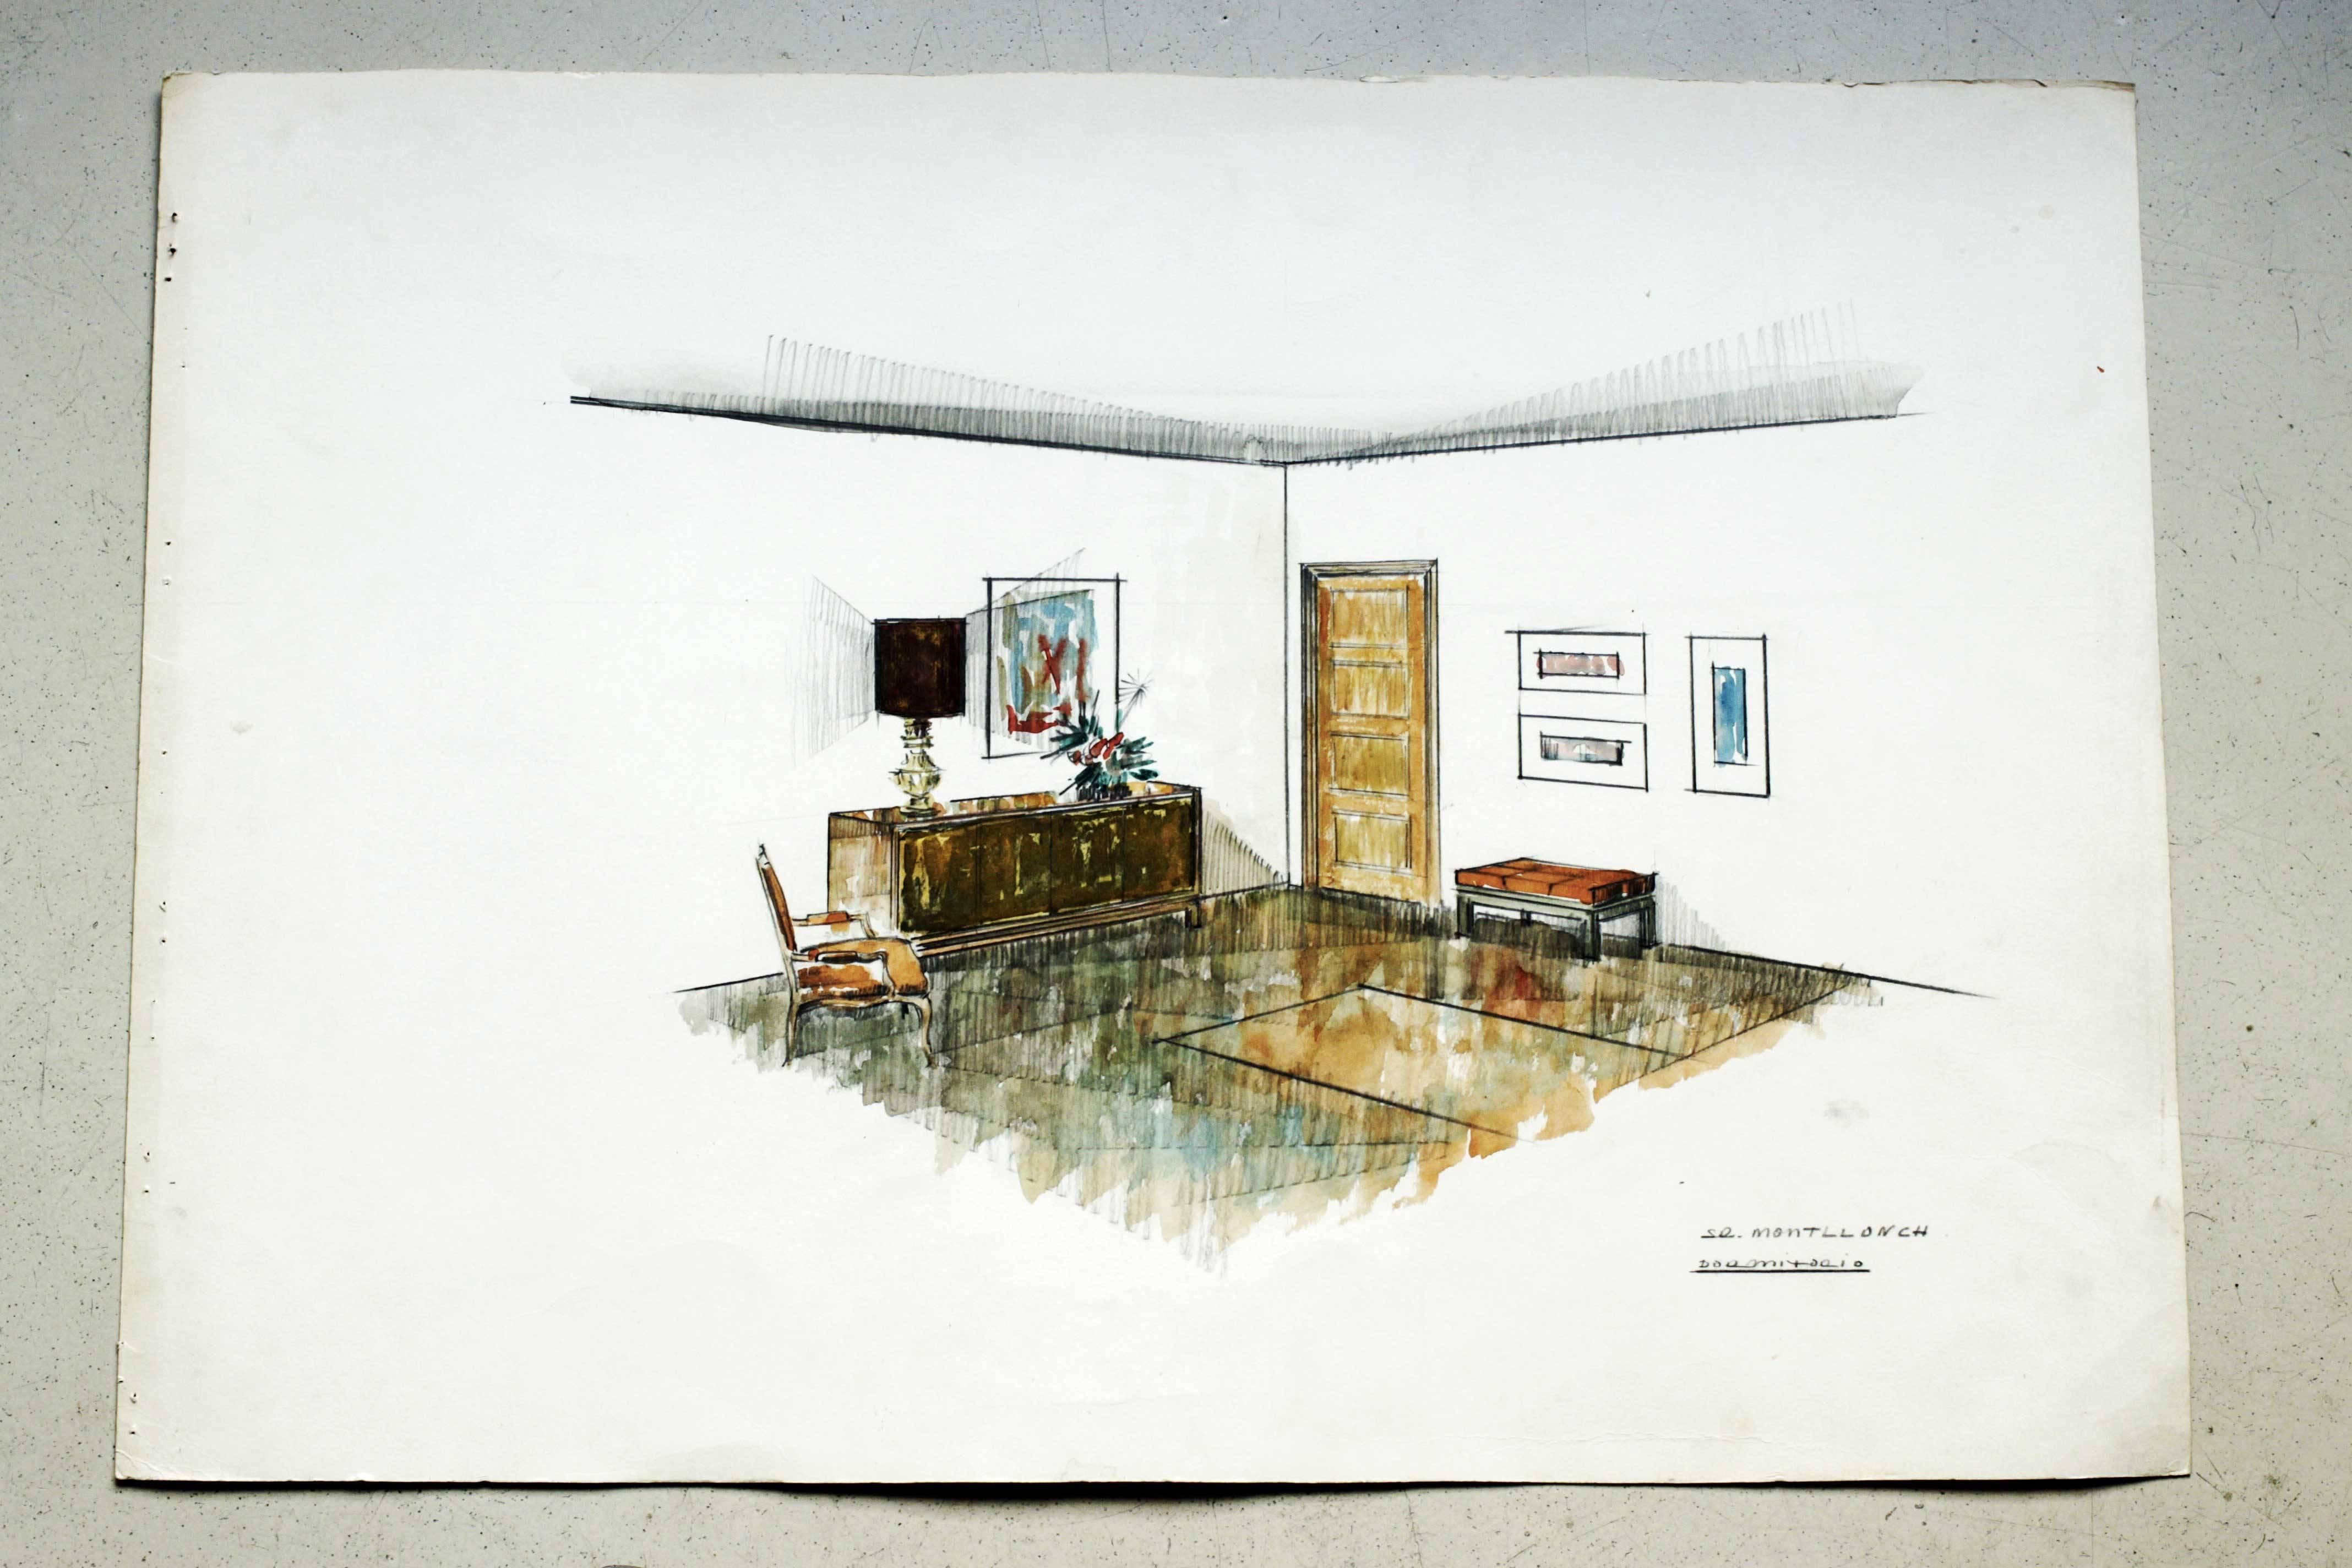 Vintage interior designer work of a bourgeois home made for a Spanish client in the 1970s. Drawing and watercolor techniques on thick paper. Overall good condition, some stains.
 